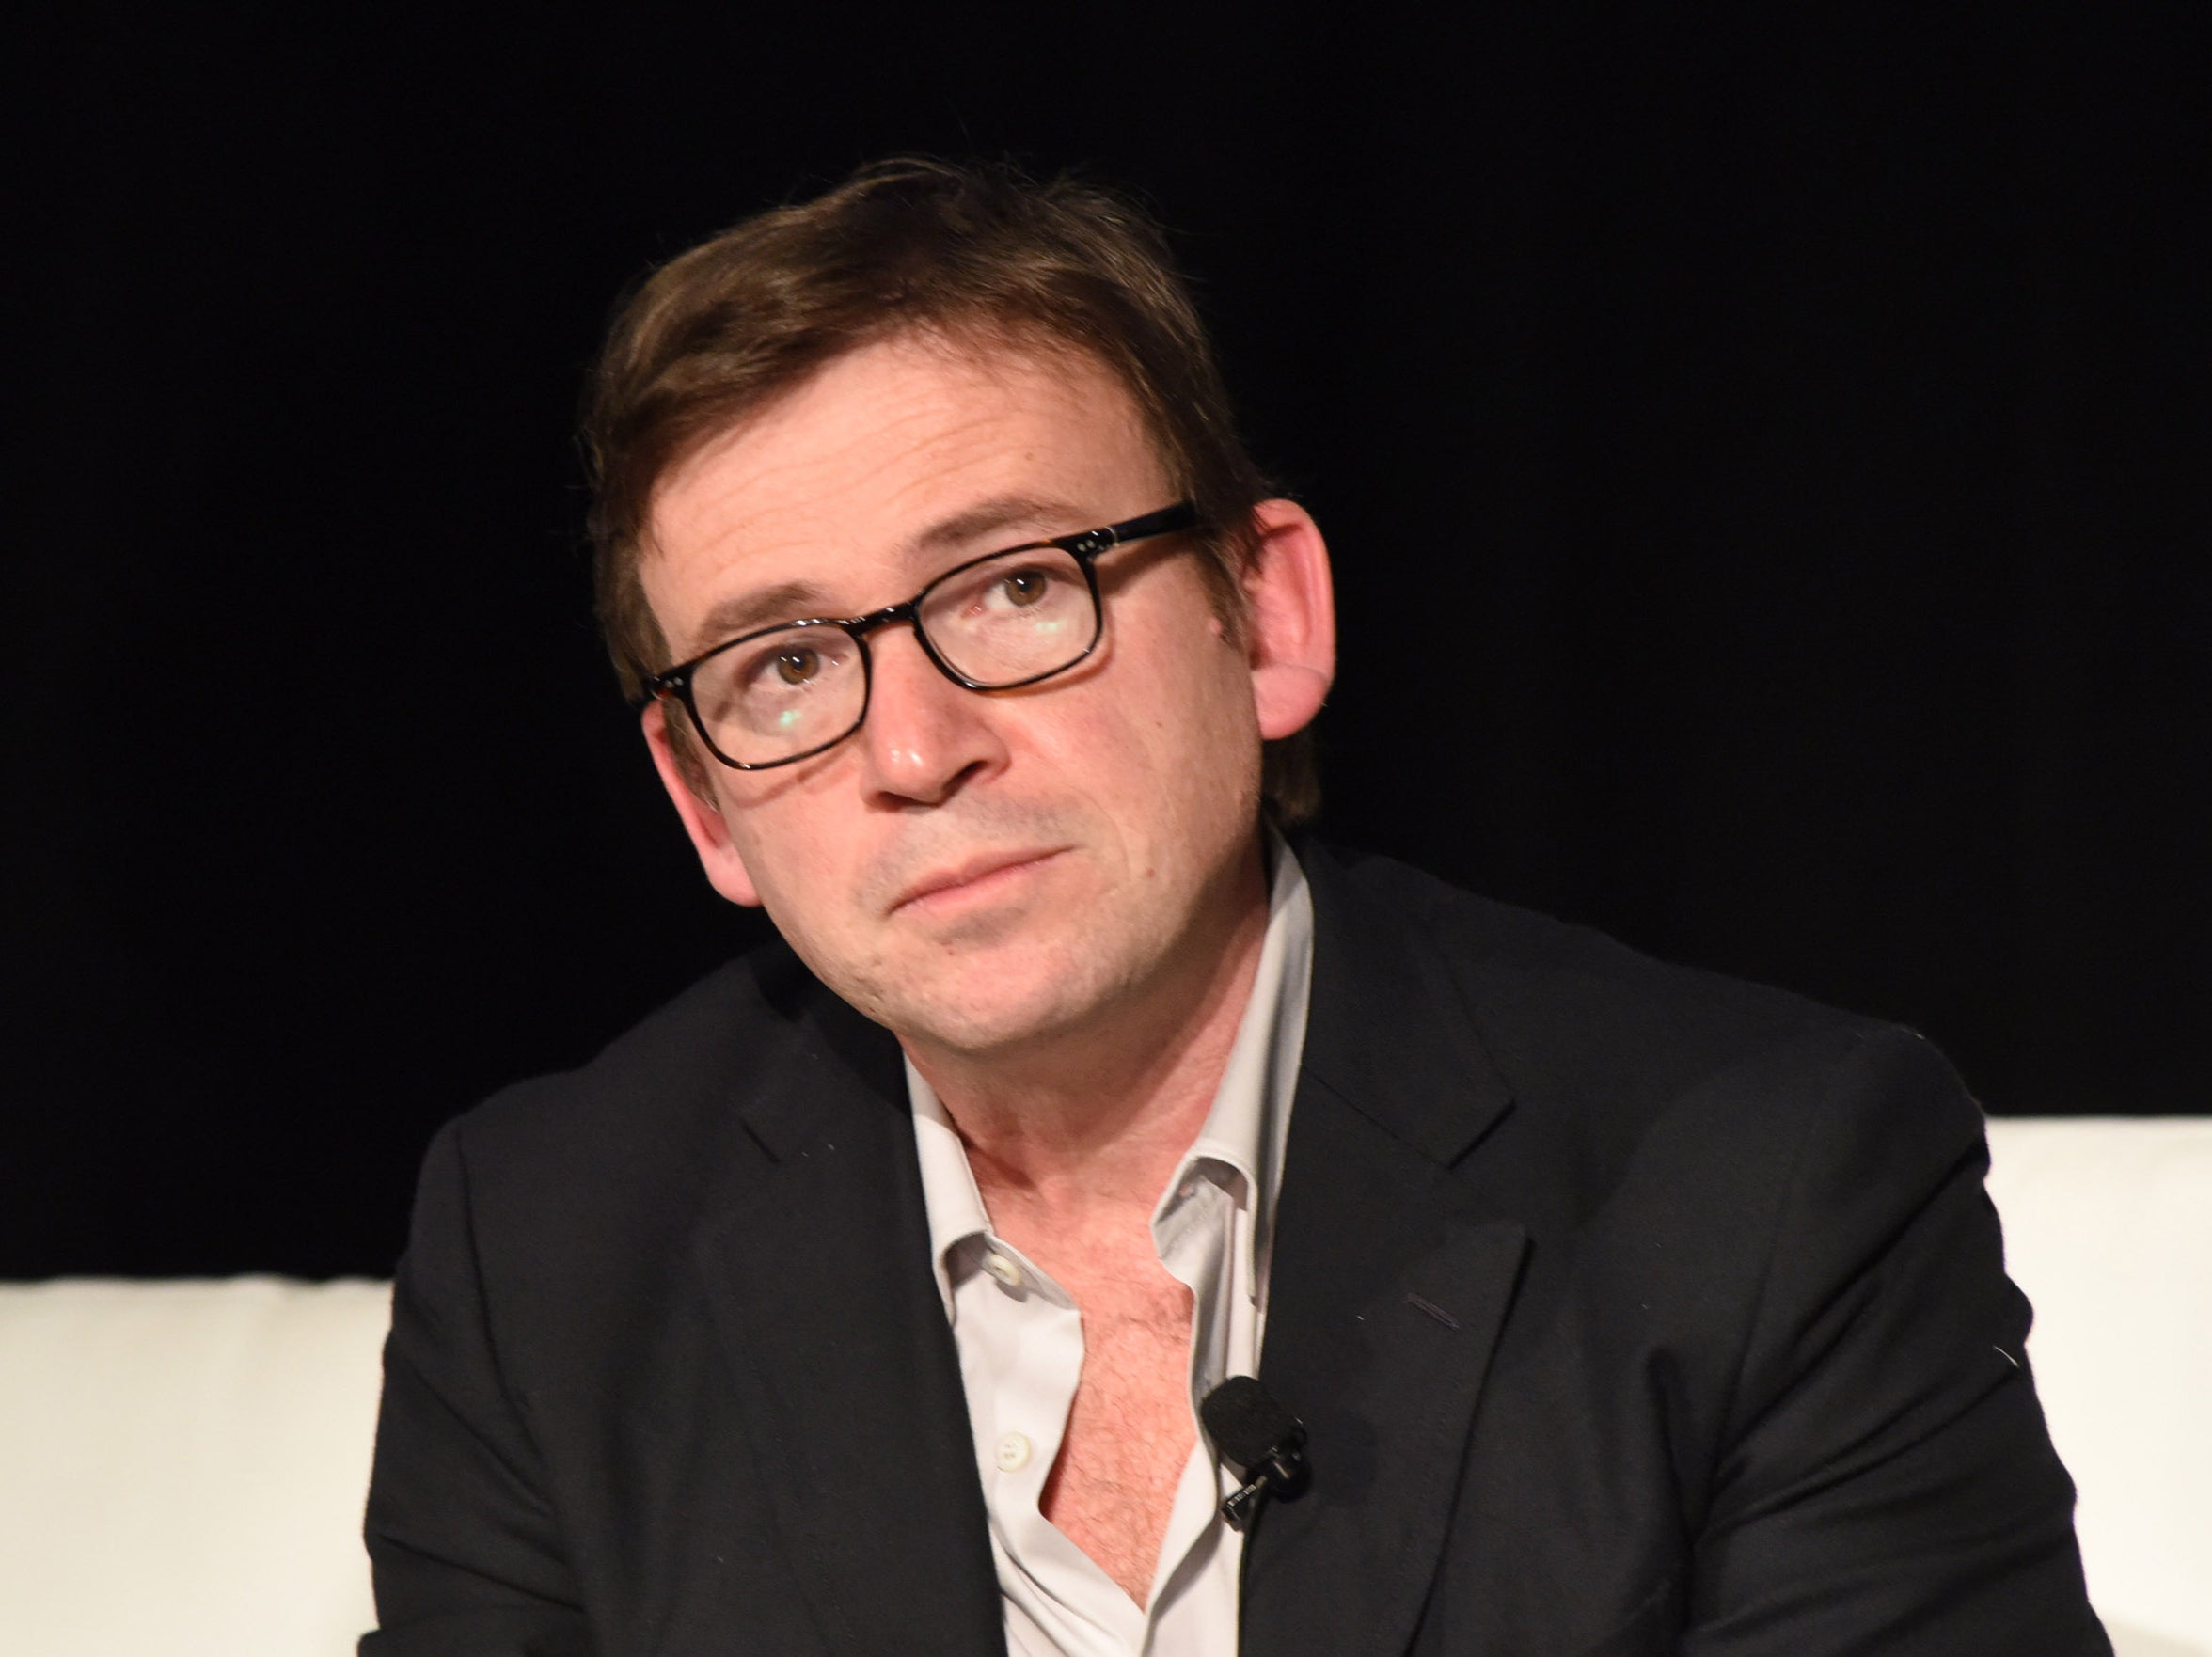 David Nicholls condemned the ongoing closure of public libraries around the UK